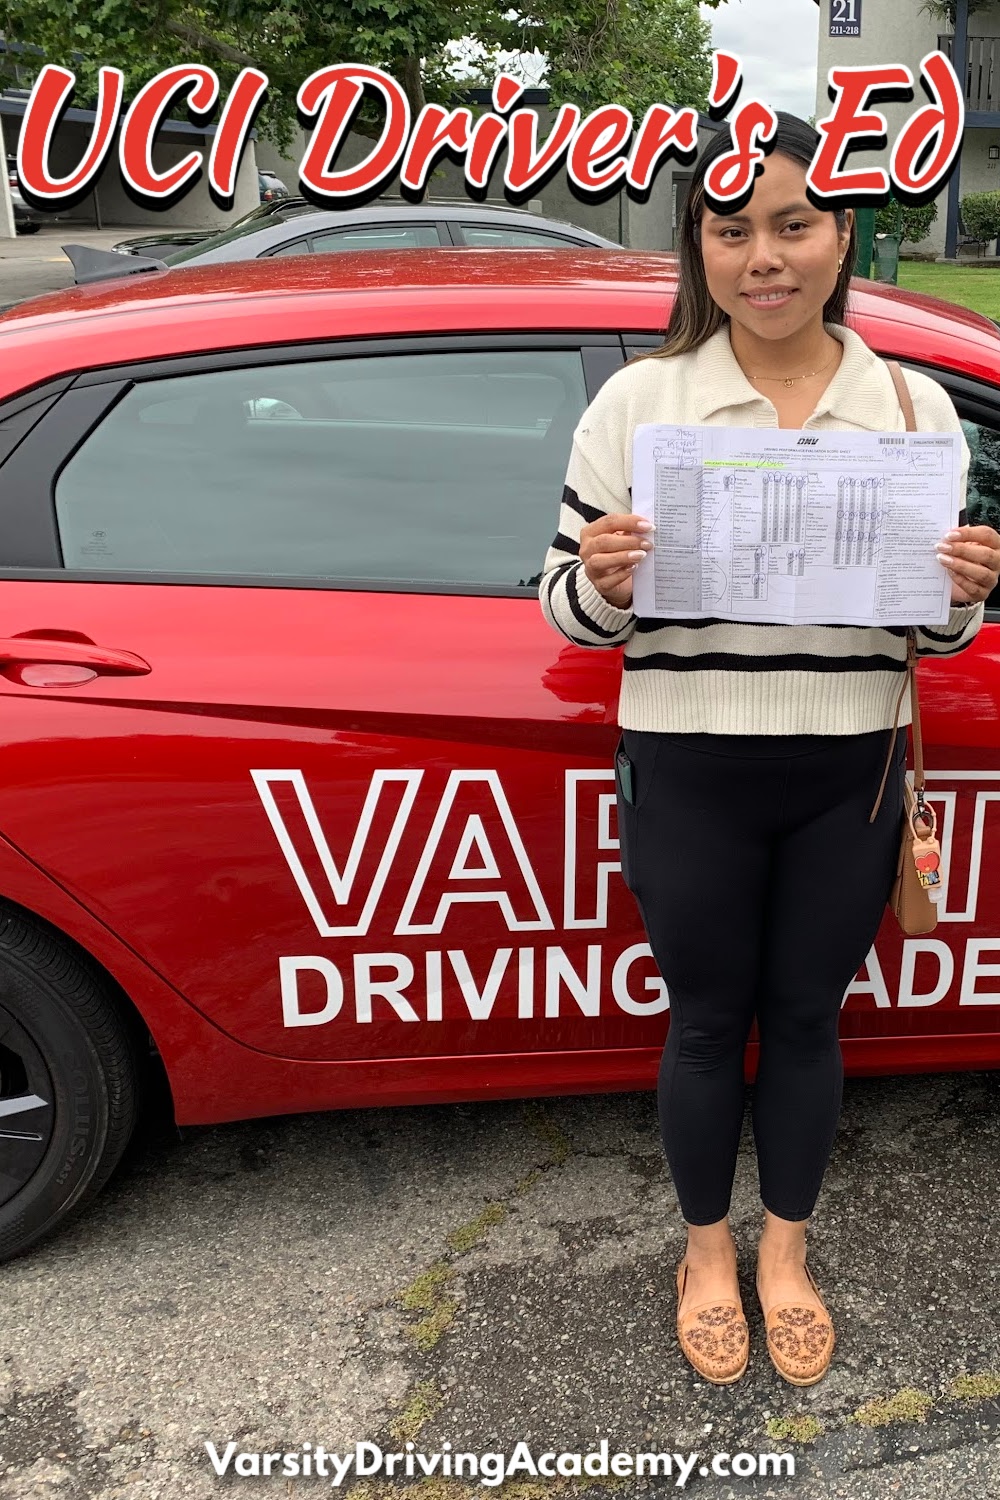 Students will learn more than just the basics of driving at Varsity Driving Academy, the best UCI driver's ed.